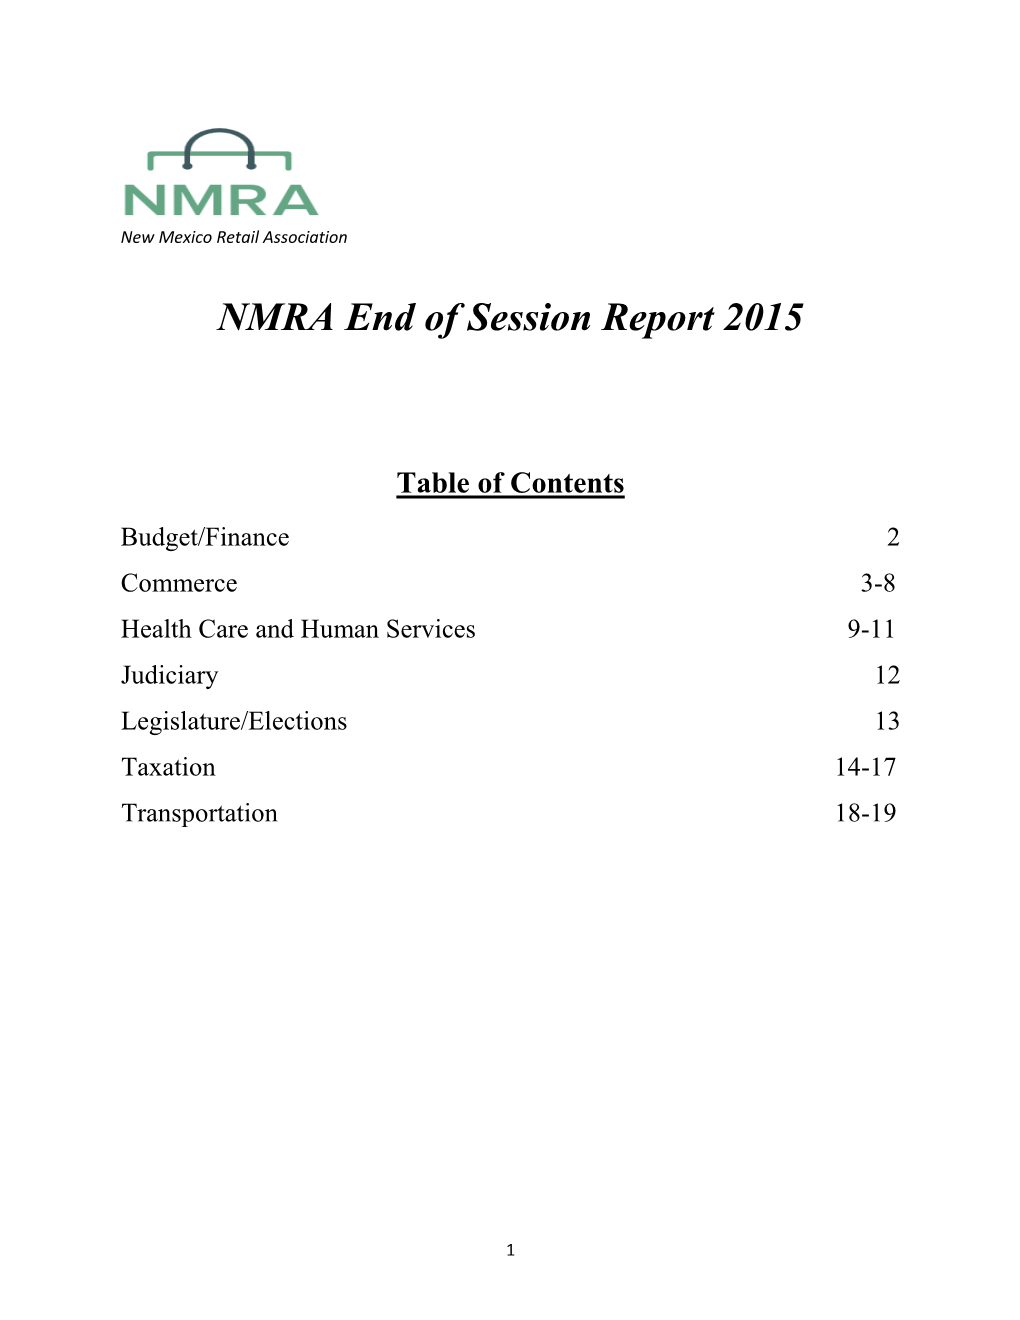 NMRA End of Session Report 2015